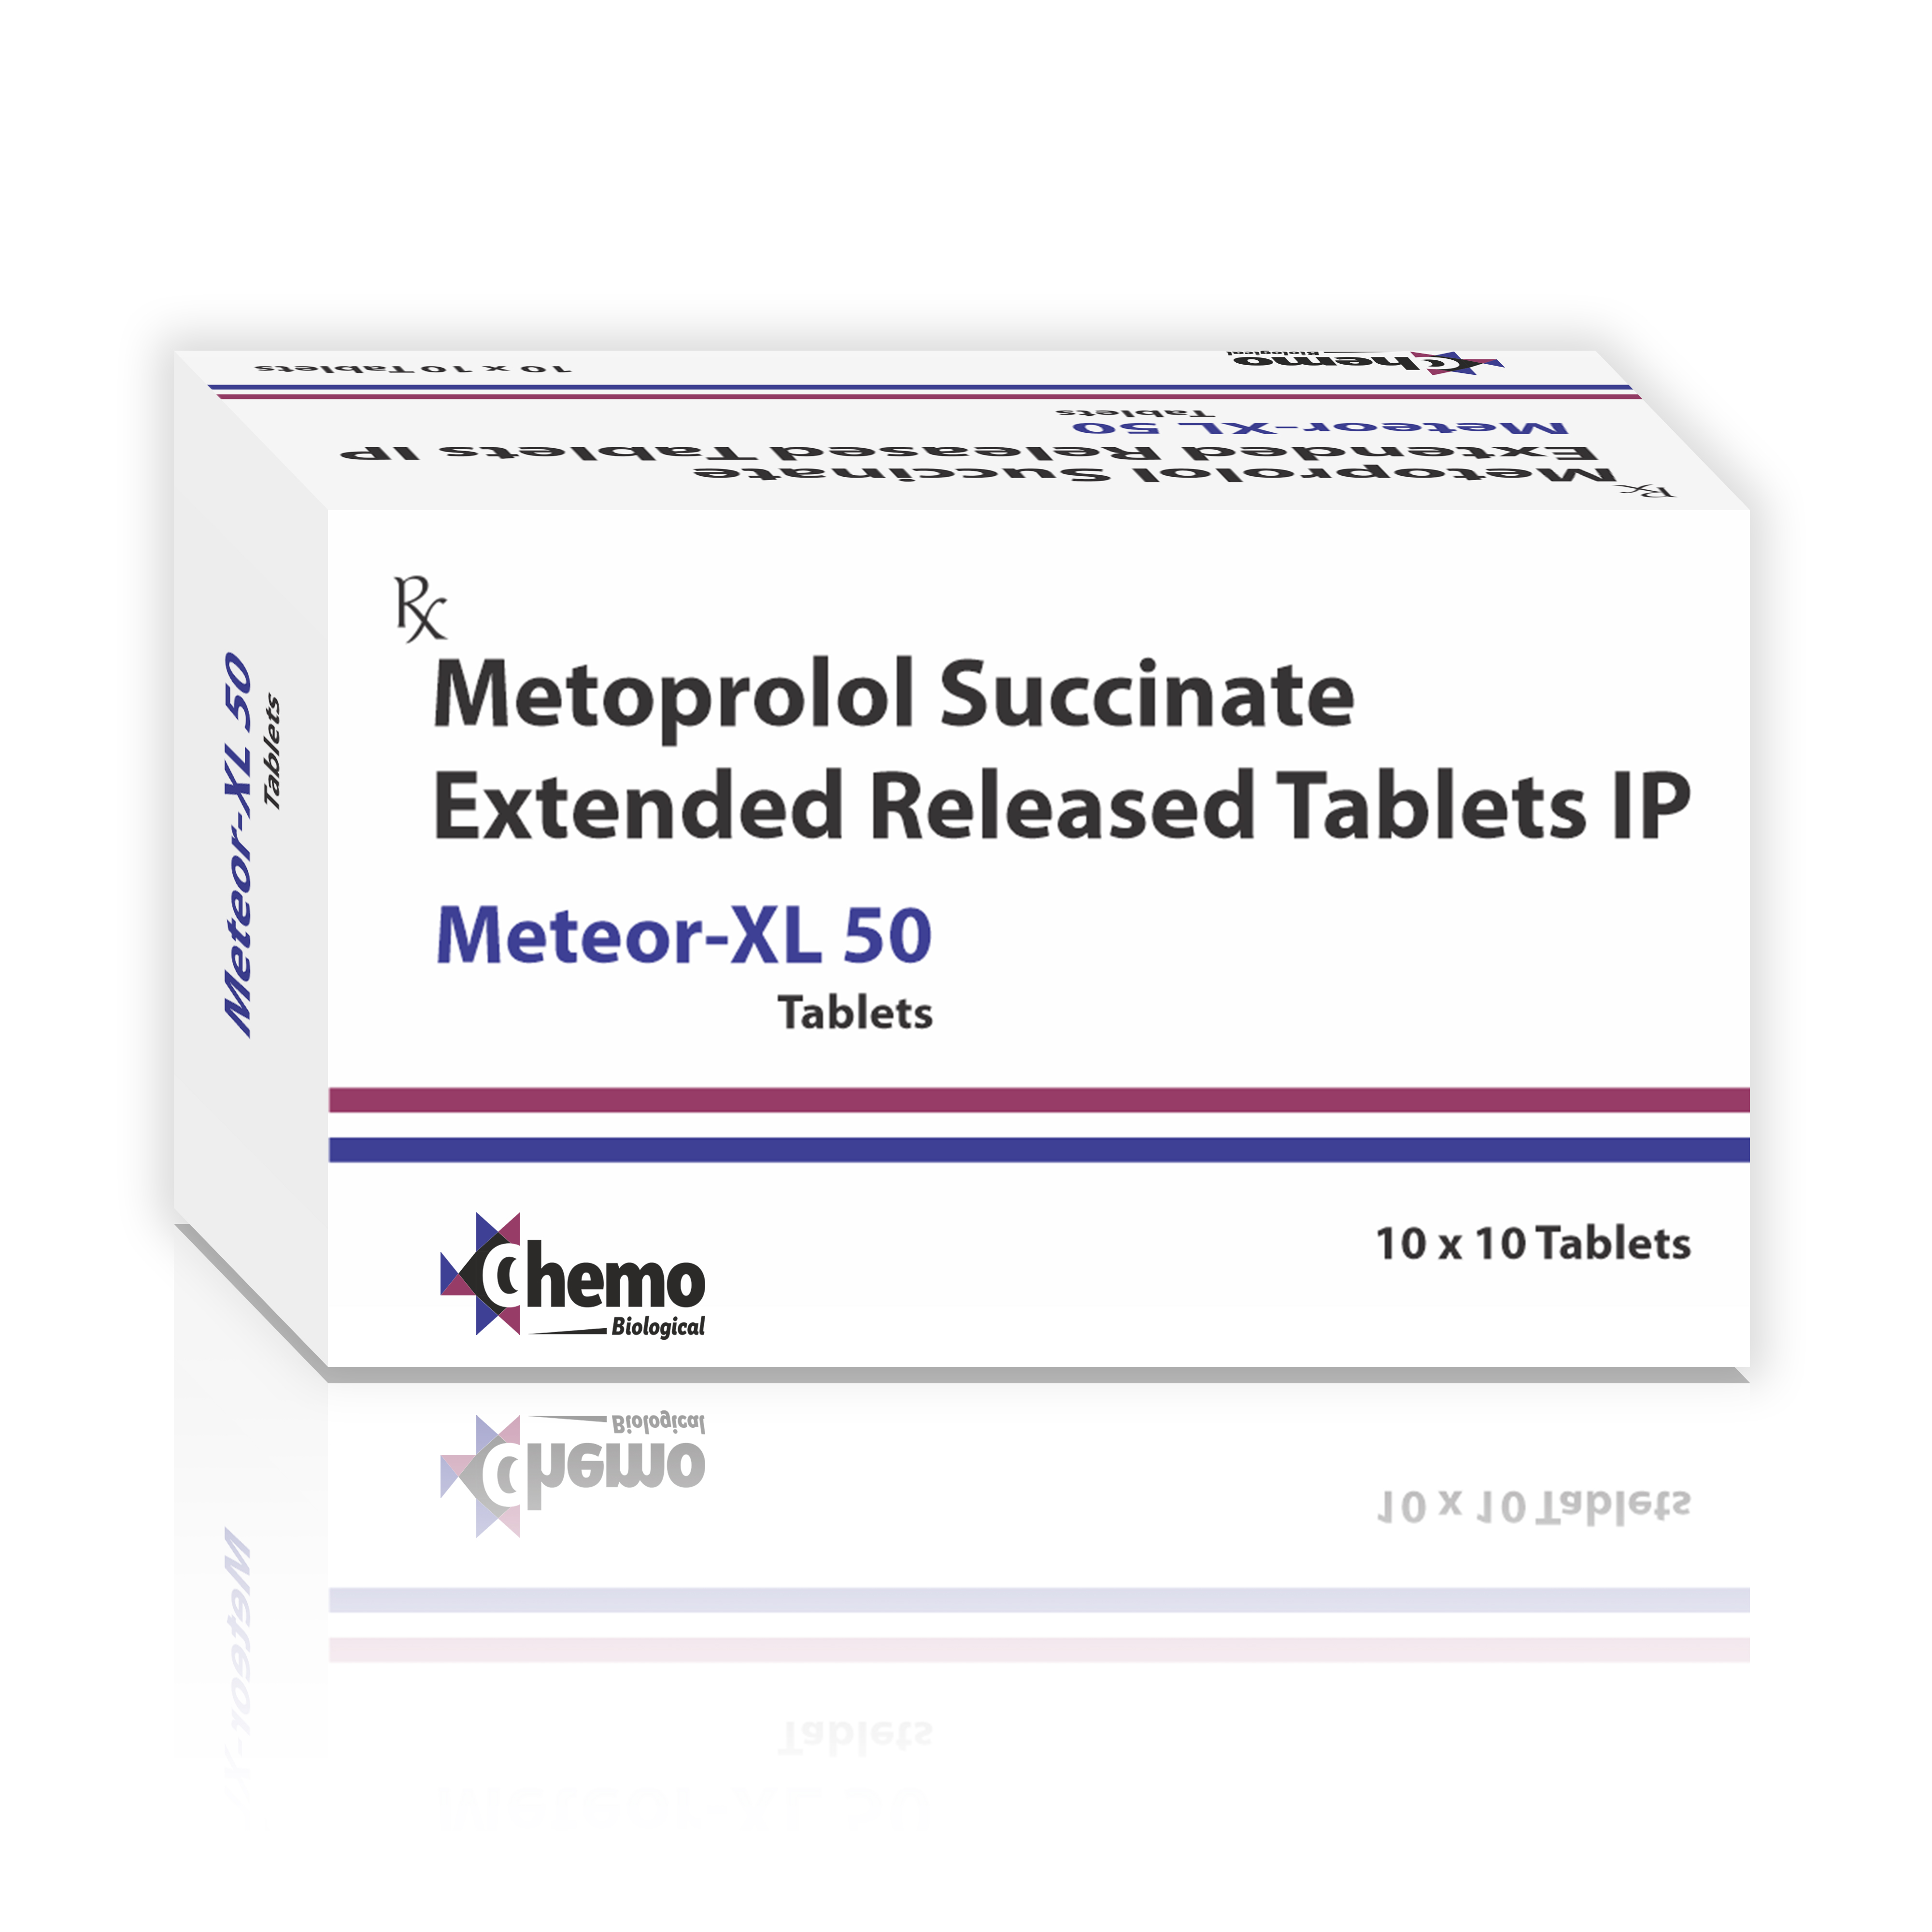 metoprolol succinate extended rel. tabs 50mg